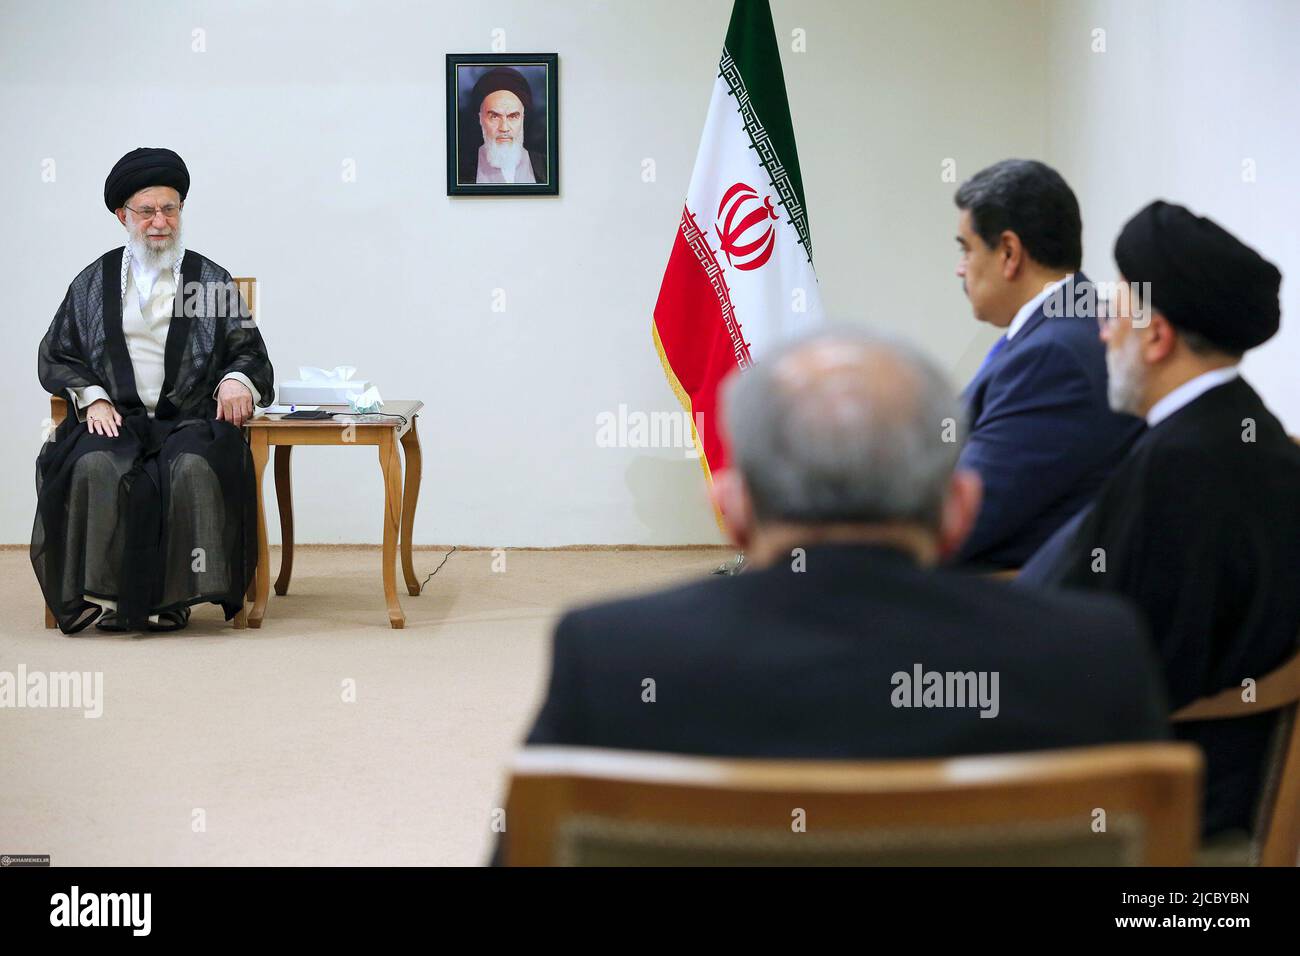 June 11, 2022, Tehran, Tehran, Iran: A handout photo made available by the Iranian supreme leader's office shows Iranian supreme leader Ayatollah ALI KHAMENEI (L) talks to Iranian president EBRAHIM RAISI (R) and Venezuelan President NICOLAS MADURO (C) during a meeting in Tehran, Iran, 11 June 2022. Alongside the likes of Russia, China, Cuba, and Turkey, Iran is one of Venezuela's main allies, and like Venezuela, it is subject to tough US sanctions. Iran is the third country that Maduro is visiting this week after trips to Turkey and Algeria. (Credit Image: © Iranian Supreme Leader'S Office via Stock Photo